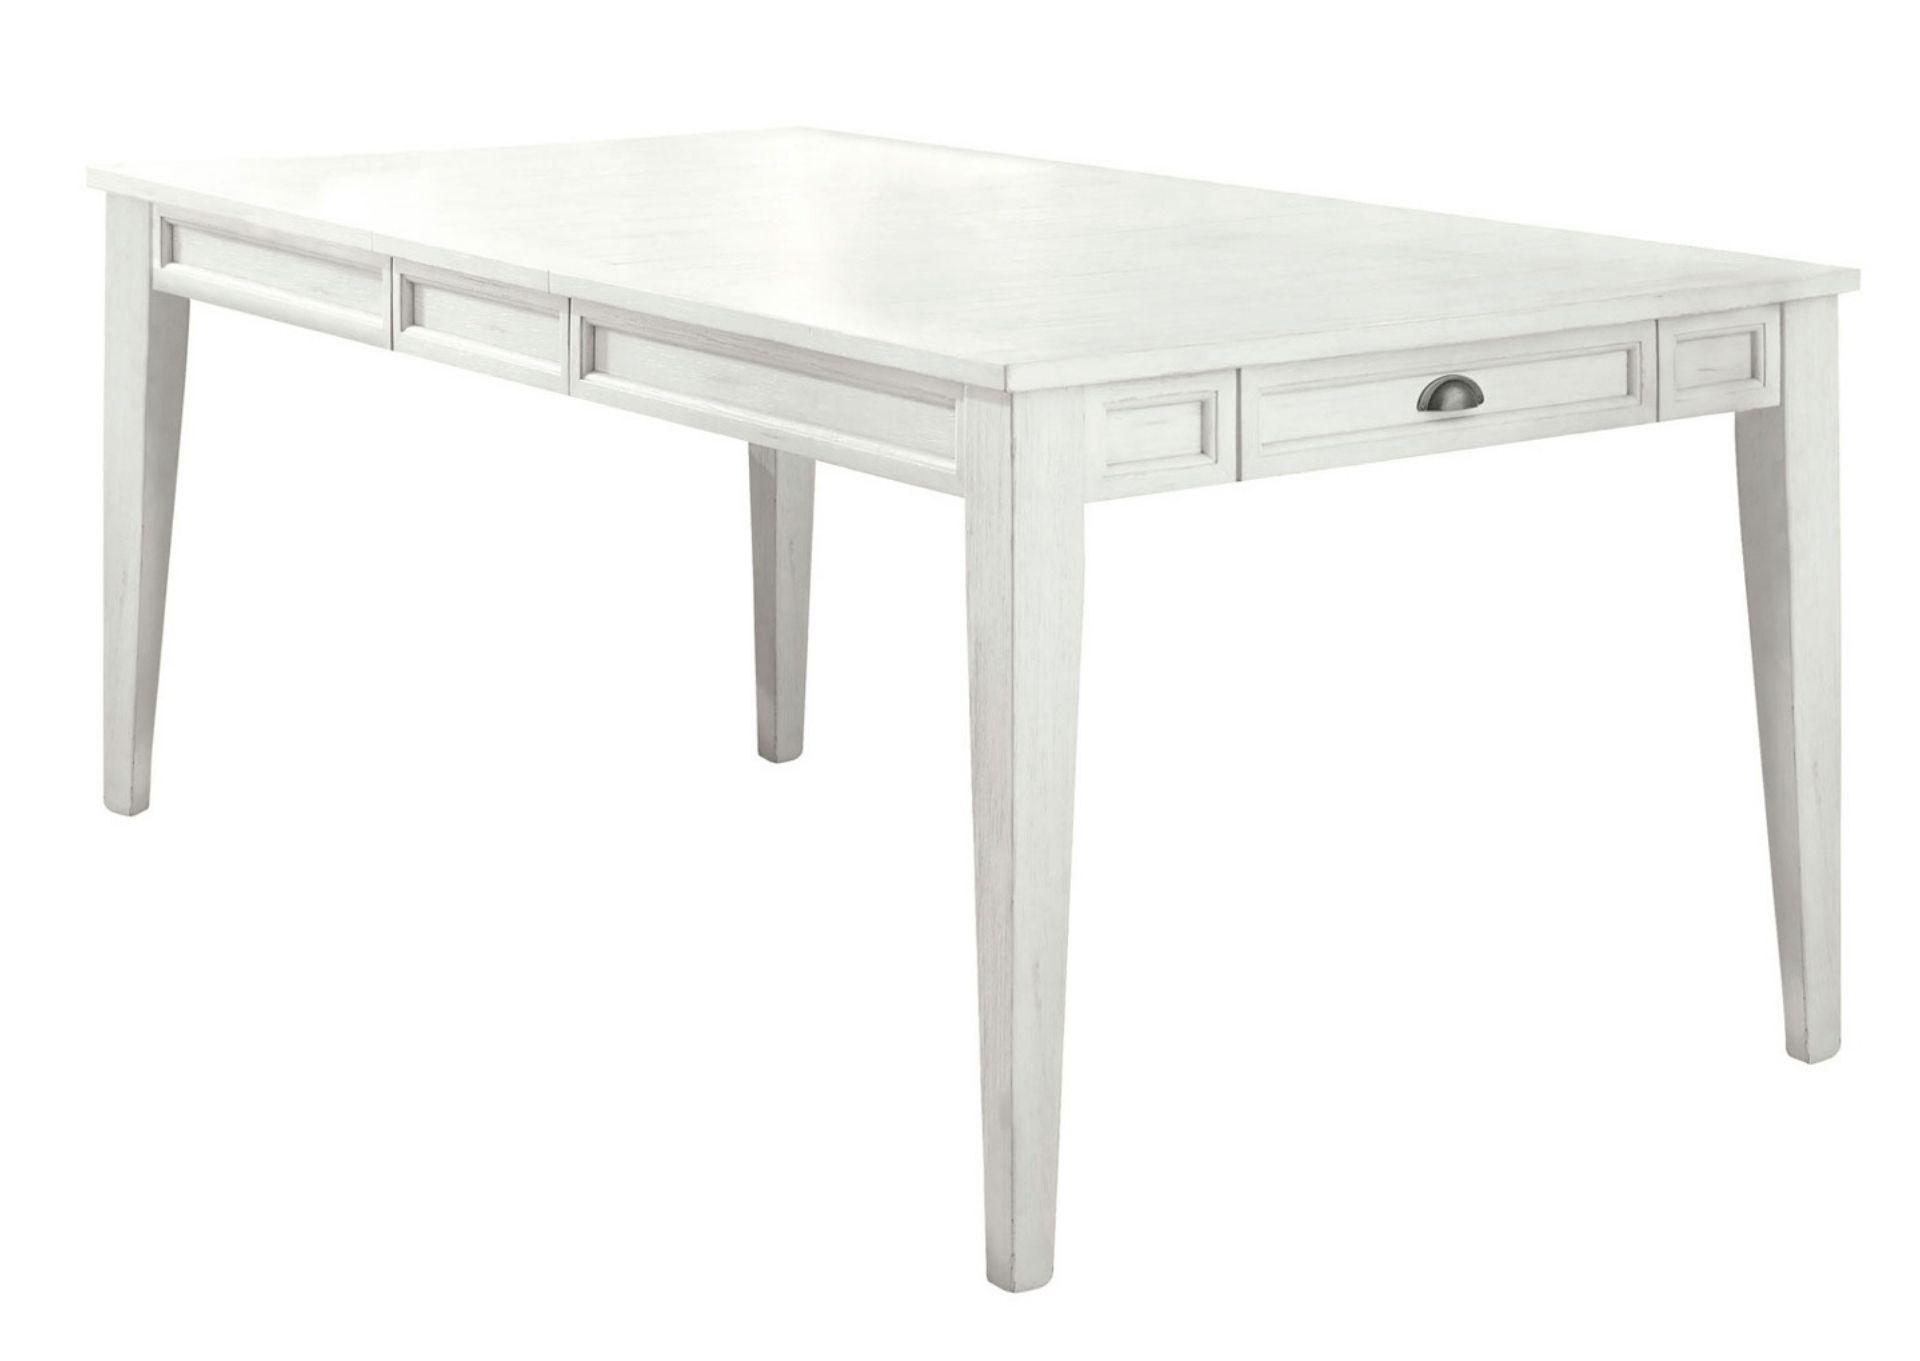 CAYLA ANTIQUE WHITE DINING TABLE